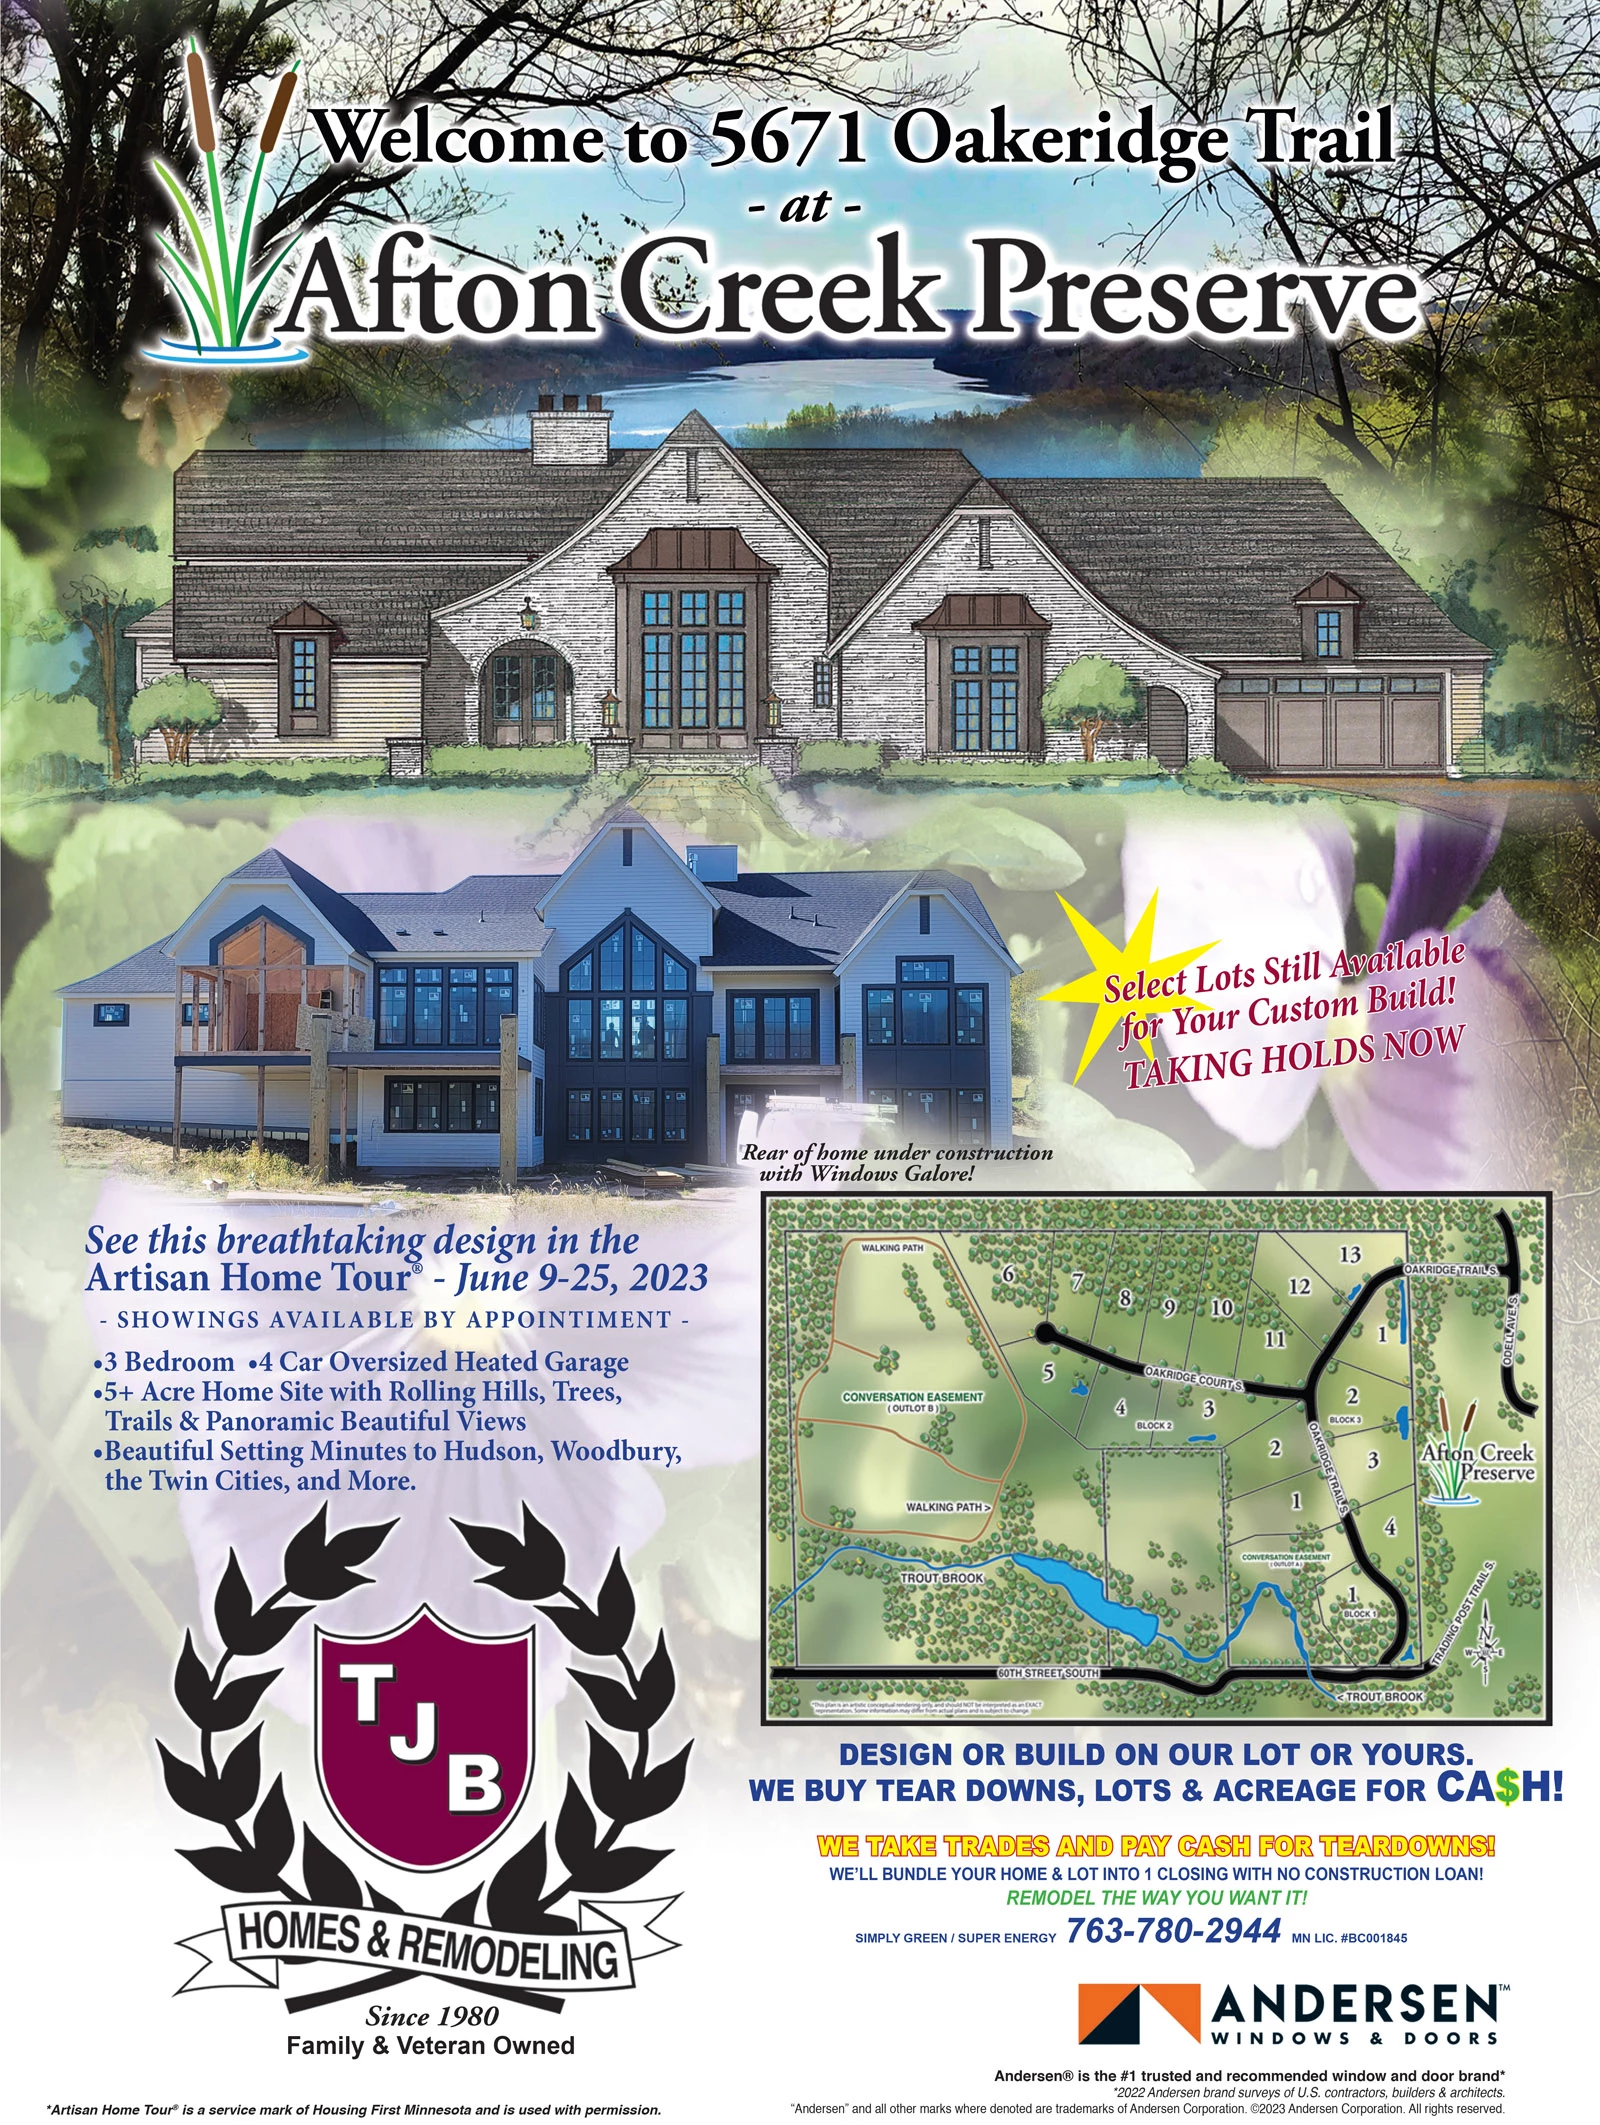 Wlecome to 5671 Oakridge Trail at Afton Creek Preserve. See this breathtaking design in the spring Parage of Homes Tour. Select Lots Still Available for Your Custom Build! TAKING HOLDS NOW.